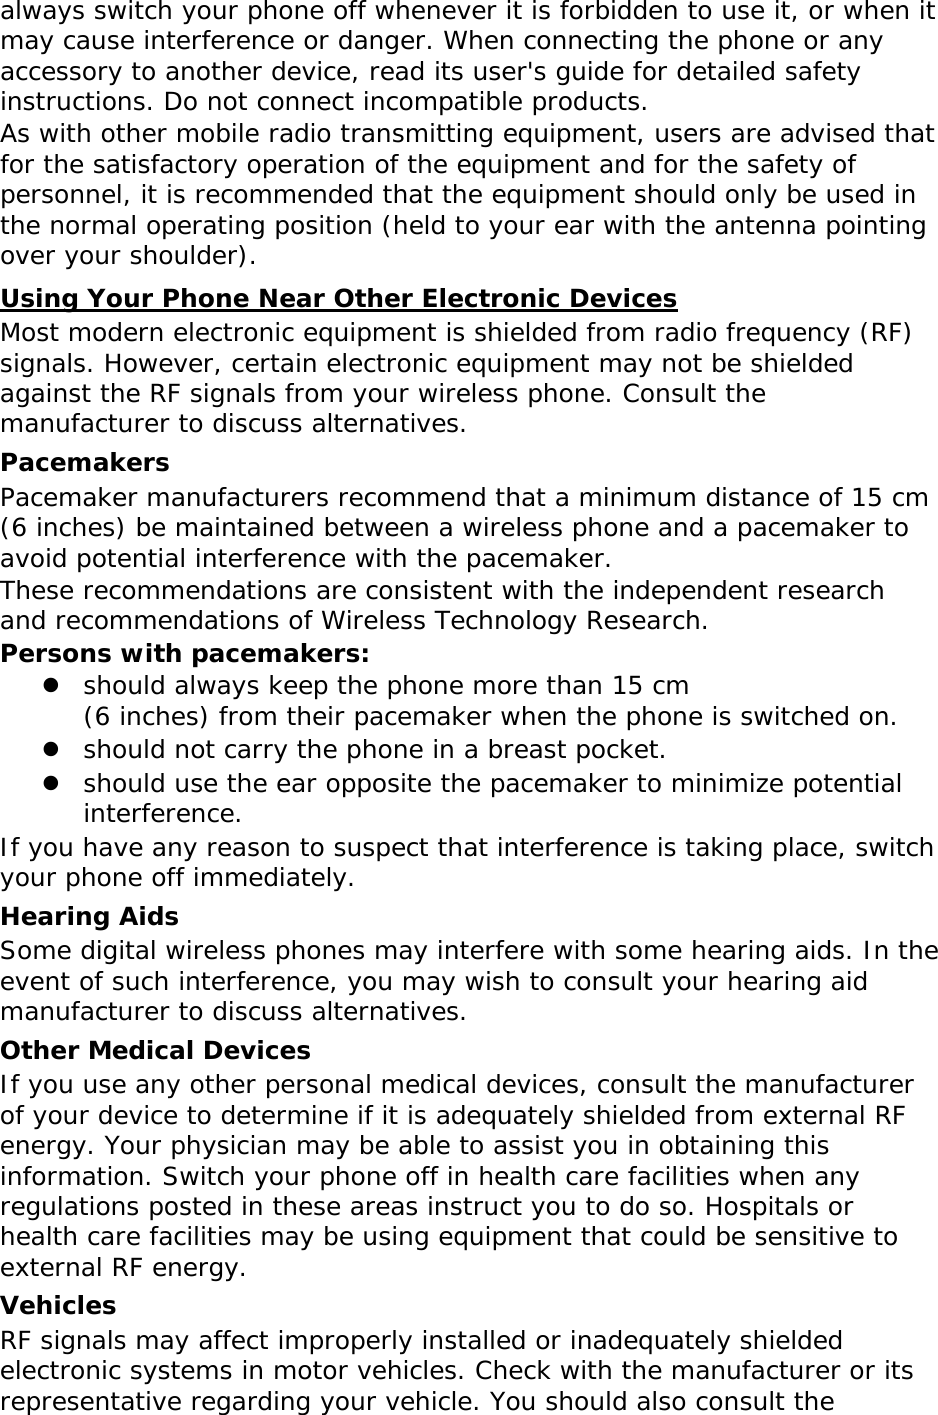 always switch your phone off whenever it is forbidden to use it, or when it may cause interference or danger. When connecting the phone or any accessory to another device, read its user&apos;s guide for detailed safety instructions. Do not connect incompatible products. As with other mobile radio transmitting equipment, users are advised that for the satisfactory operation of the equipment and for the safety of personnel, it is recommended that the equipment should only be used in the normal operating position (held to your ear with the antenna pointing over your shoulder). Using Your Phone Near Other Electronic Devices Most modern electronic equipment is shielded from radio frequency (RF) signals. However, certain electronic equipment may not be shielded against the RF signals from your wireless phone. Consult the manufacturer to discuss alternatives. Pacemakers Pacemaker manufacturers recommend that a minimum distance of 15 cm (6 inches) be maintained between a wireless phone and a pacemaker to avoid potential interference with the pacemaker. These recommendations are consistent with the independent research and recommendations of Wireless Technology Research. Persons with pacemakers:  should always keep the phone more than 15 cm  (6 inches) from their pacemaker when the phone is switched on.  should not carry the phone in a breast pocket.  should use the ear opposite the pacemaker to minimize potential interference. If you have any reason to suspect that interference is taking place, switch your phone off immediately. Hearing Aids Some digital wireless phones may interfere with some hearing aids. In the event of such interference, you may wish to consult your hearing aid manufacturer to discuss alternatives. Other Medical Devices If you use any other personal medical devices, consult the manufacturer of your device to determine if it is adequately shielded from external RF energy. Your physician may be able to assist you in obtaining this information. Switch your phone off in health care facilities when any regulations posted in these areas instruct you to do so. Hospitals or health care facilities may be using equipment that could be sensitive to external RF energy. Vehicles RF signals may affect improperly installed or inadequately shielded electronic systems in motor vehicles. Check with the manufacturer or its representative regarding your vehicle. You should also consult the 